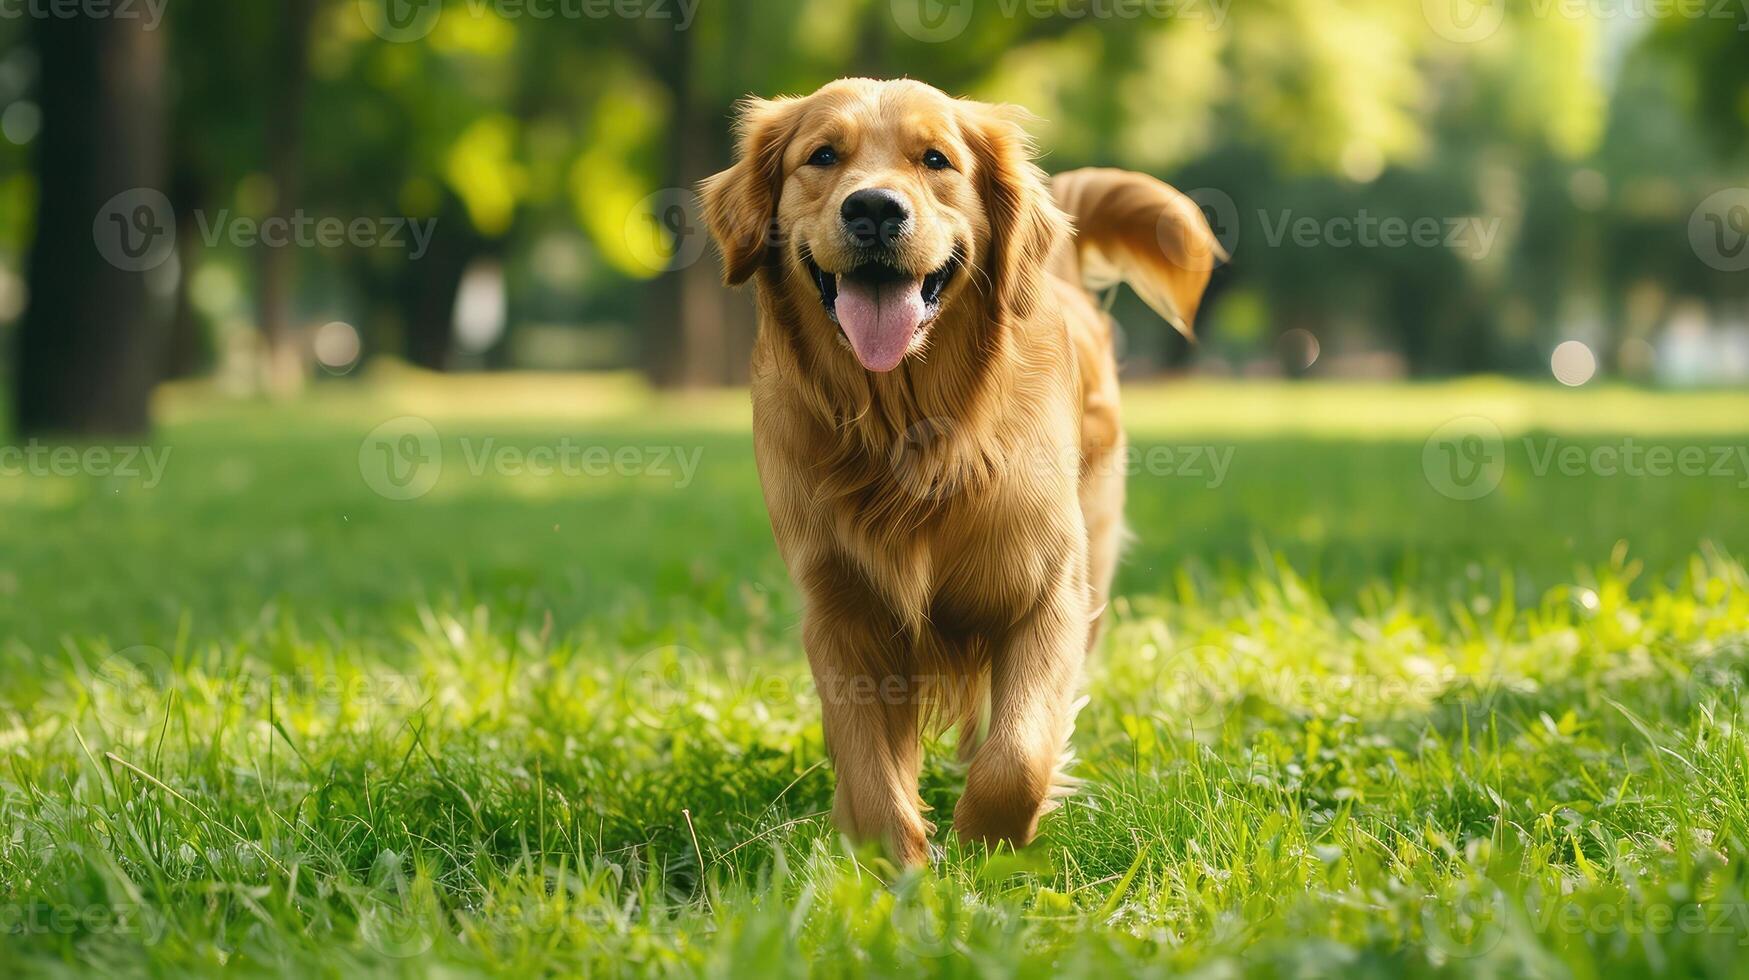 AI generated Smiling Face Cute Lovely Adorable Golden Retriever Dog Walking in Fresh Green Grass Lawn in the Park photo